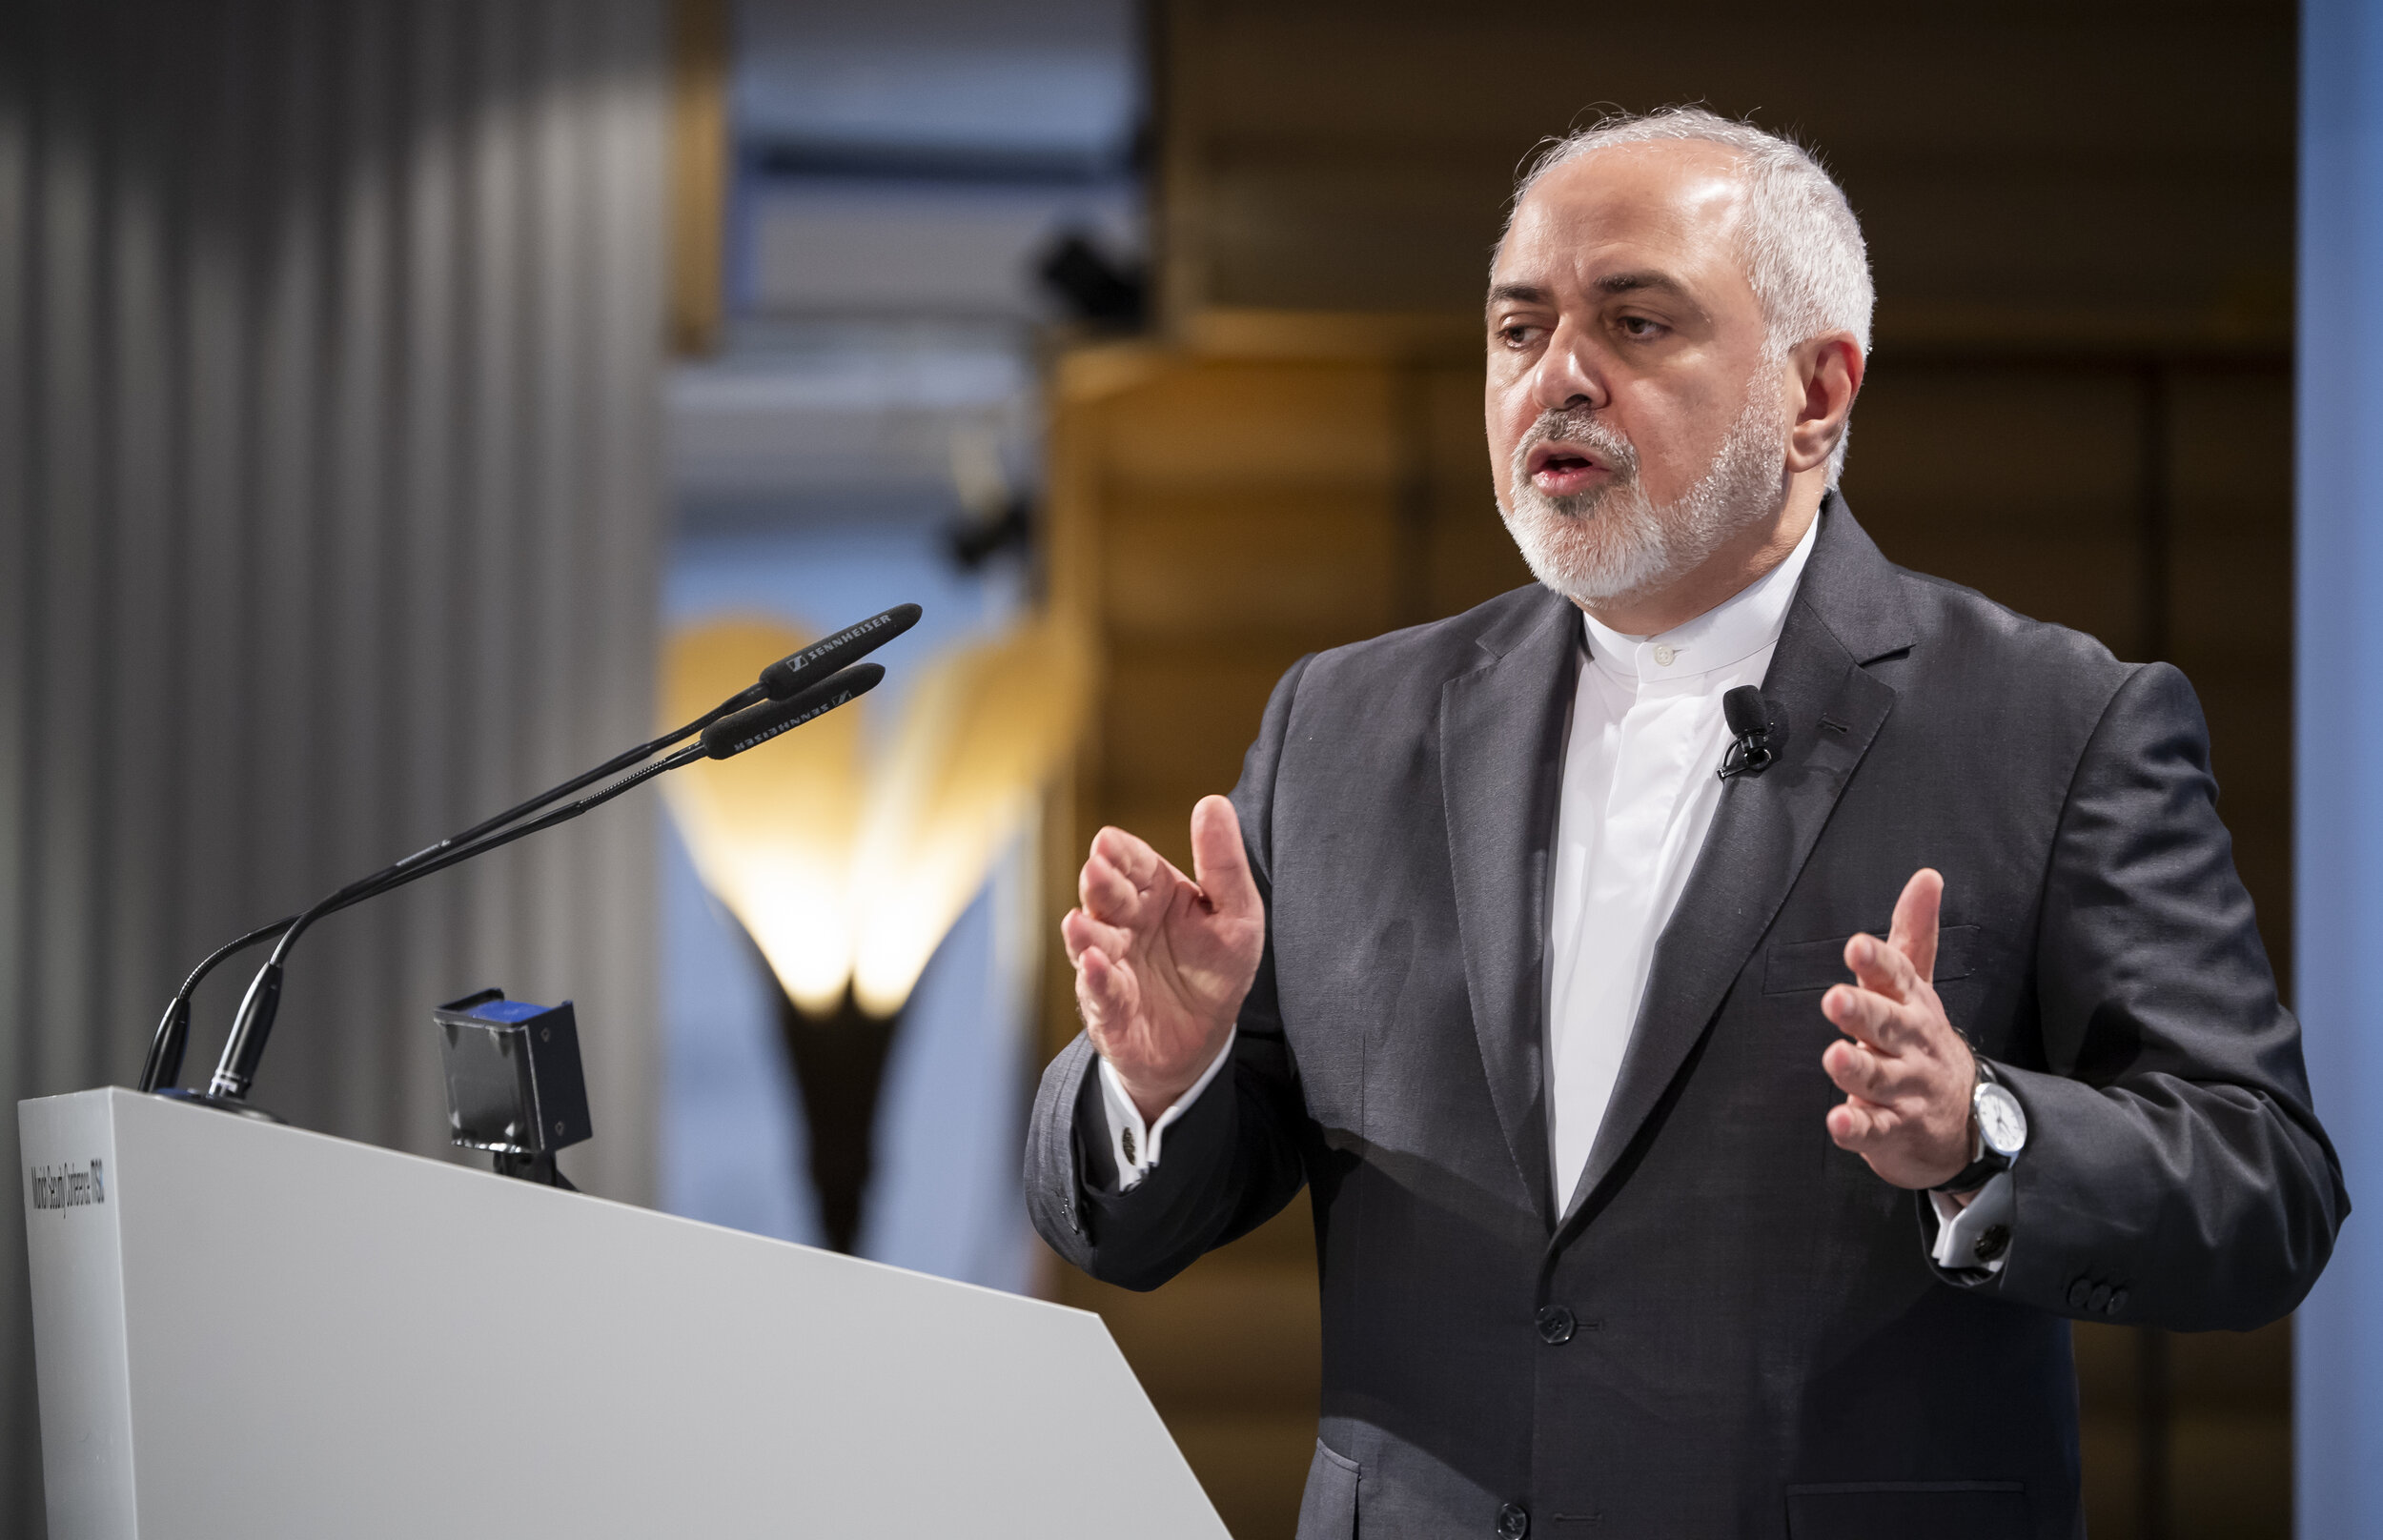 PICTURED: Iranian Foreign Minister Mohammad Javad Zarif.